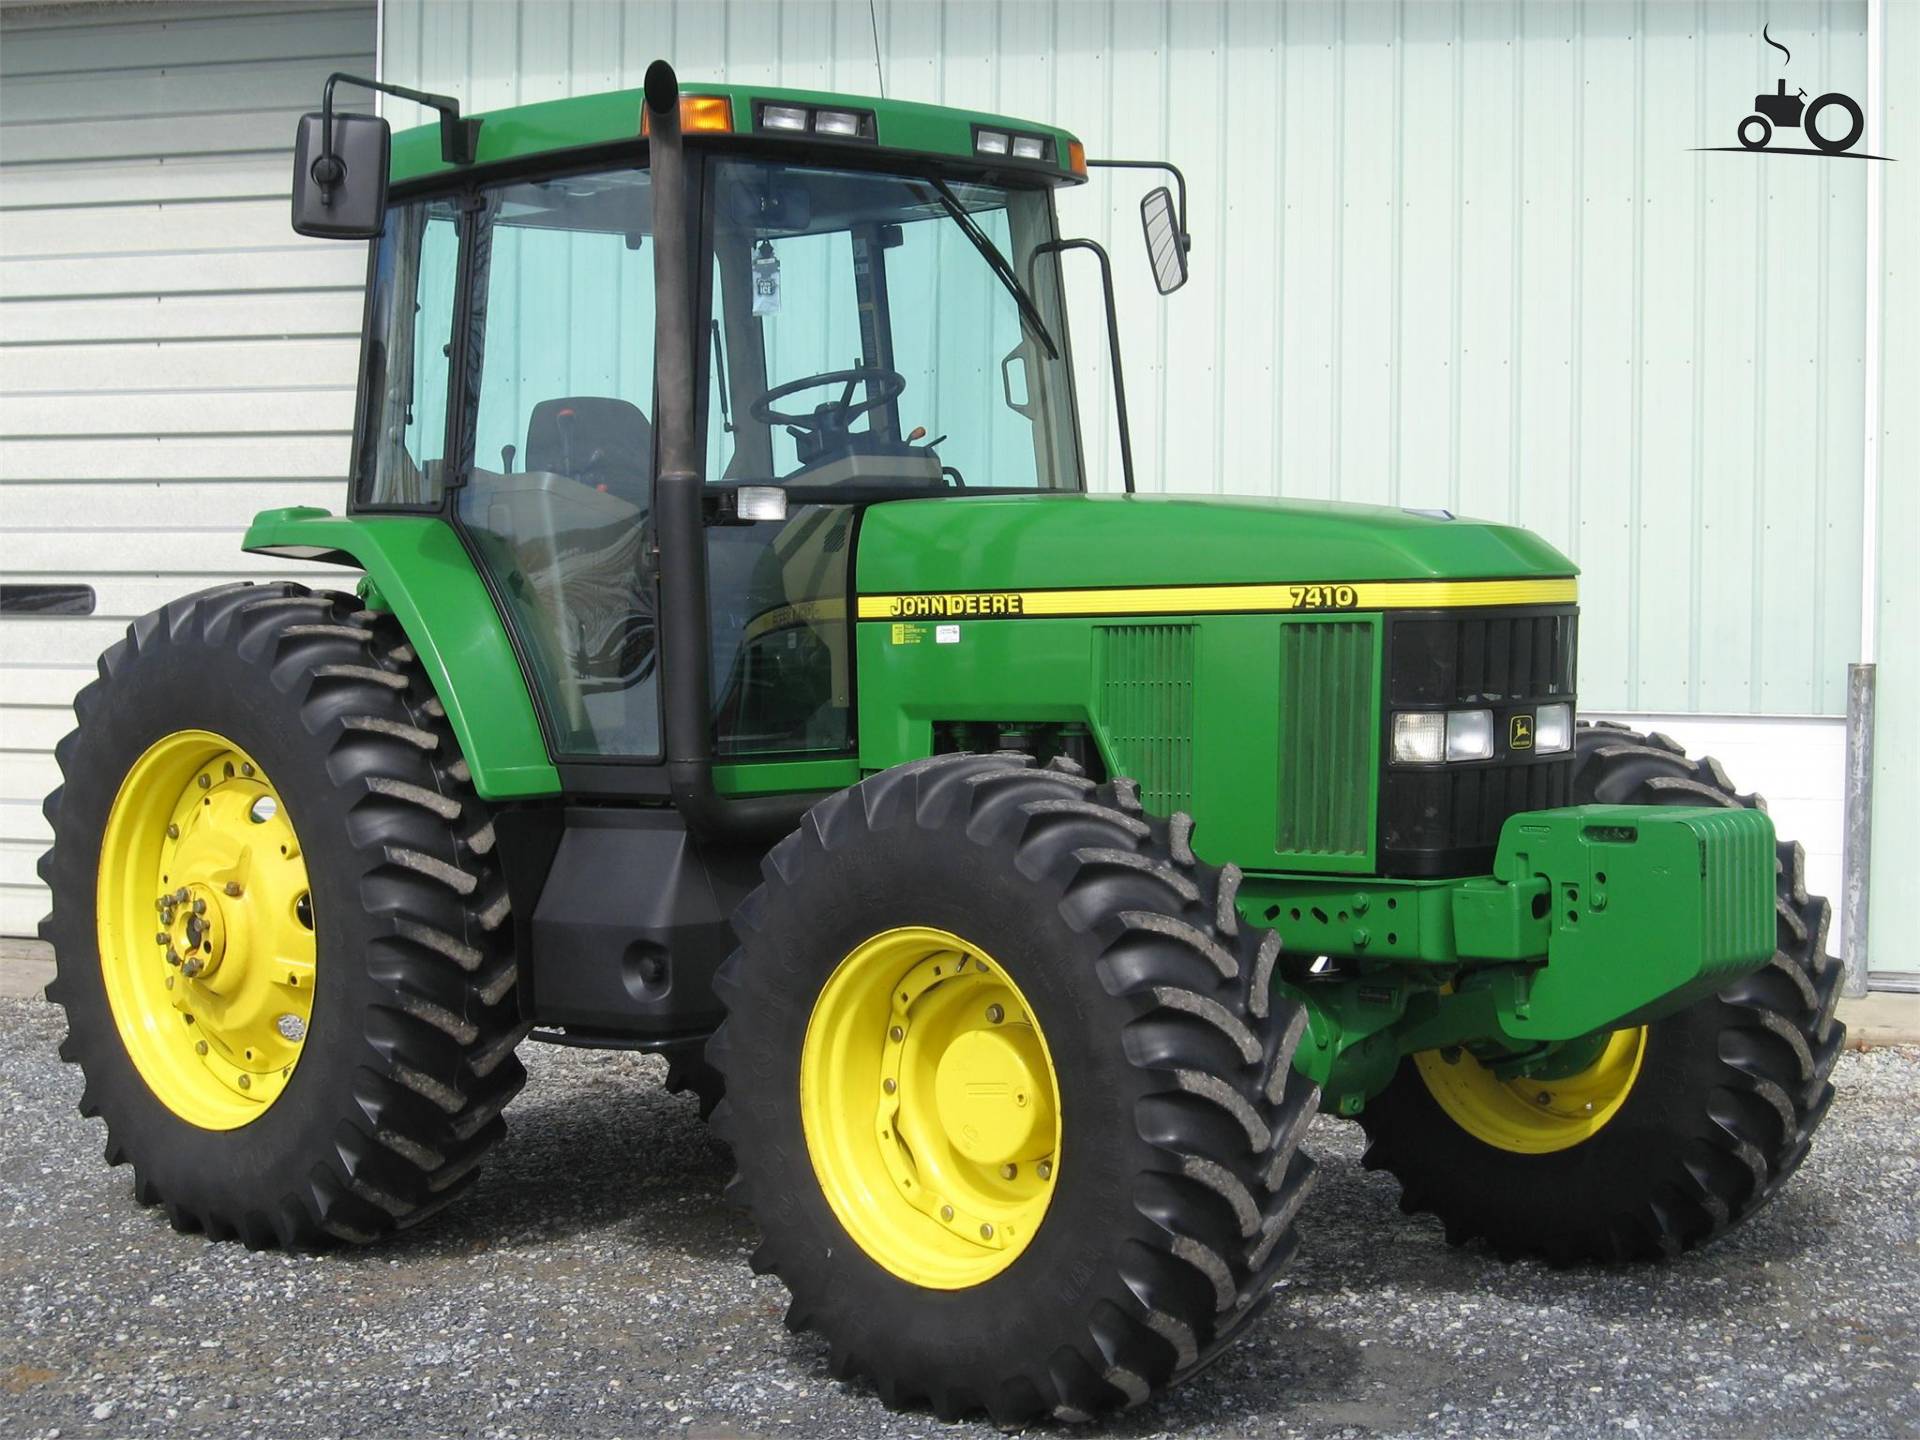 John Deere 7410 Specs and data - Everything about the John Deere 7410